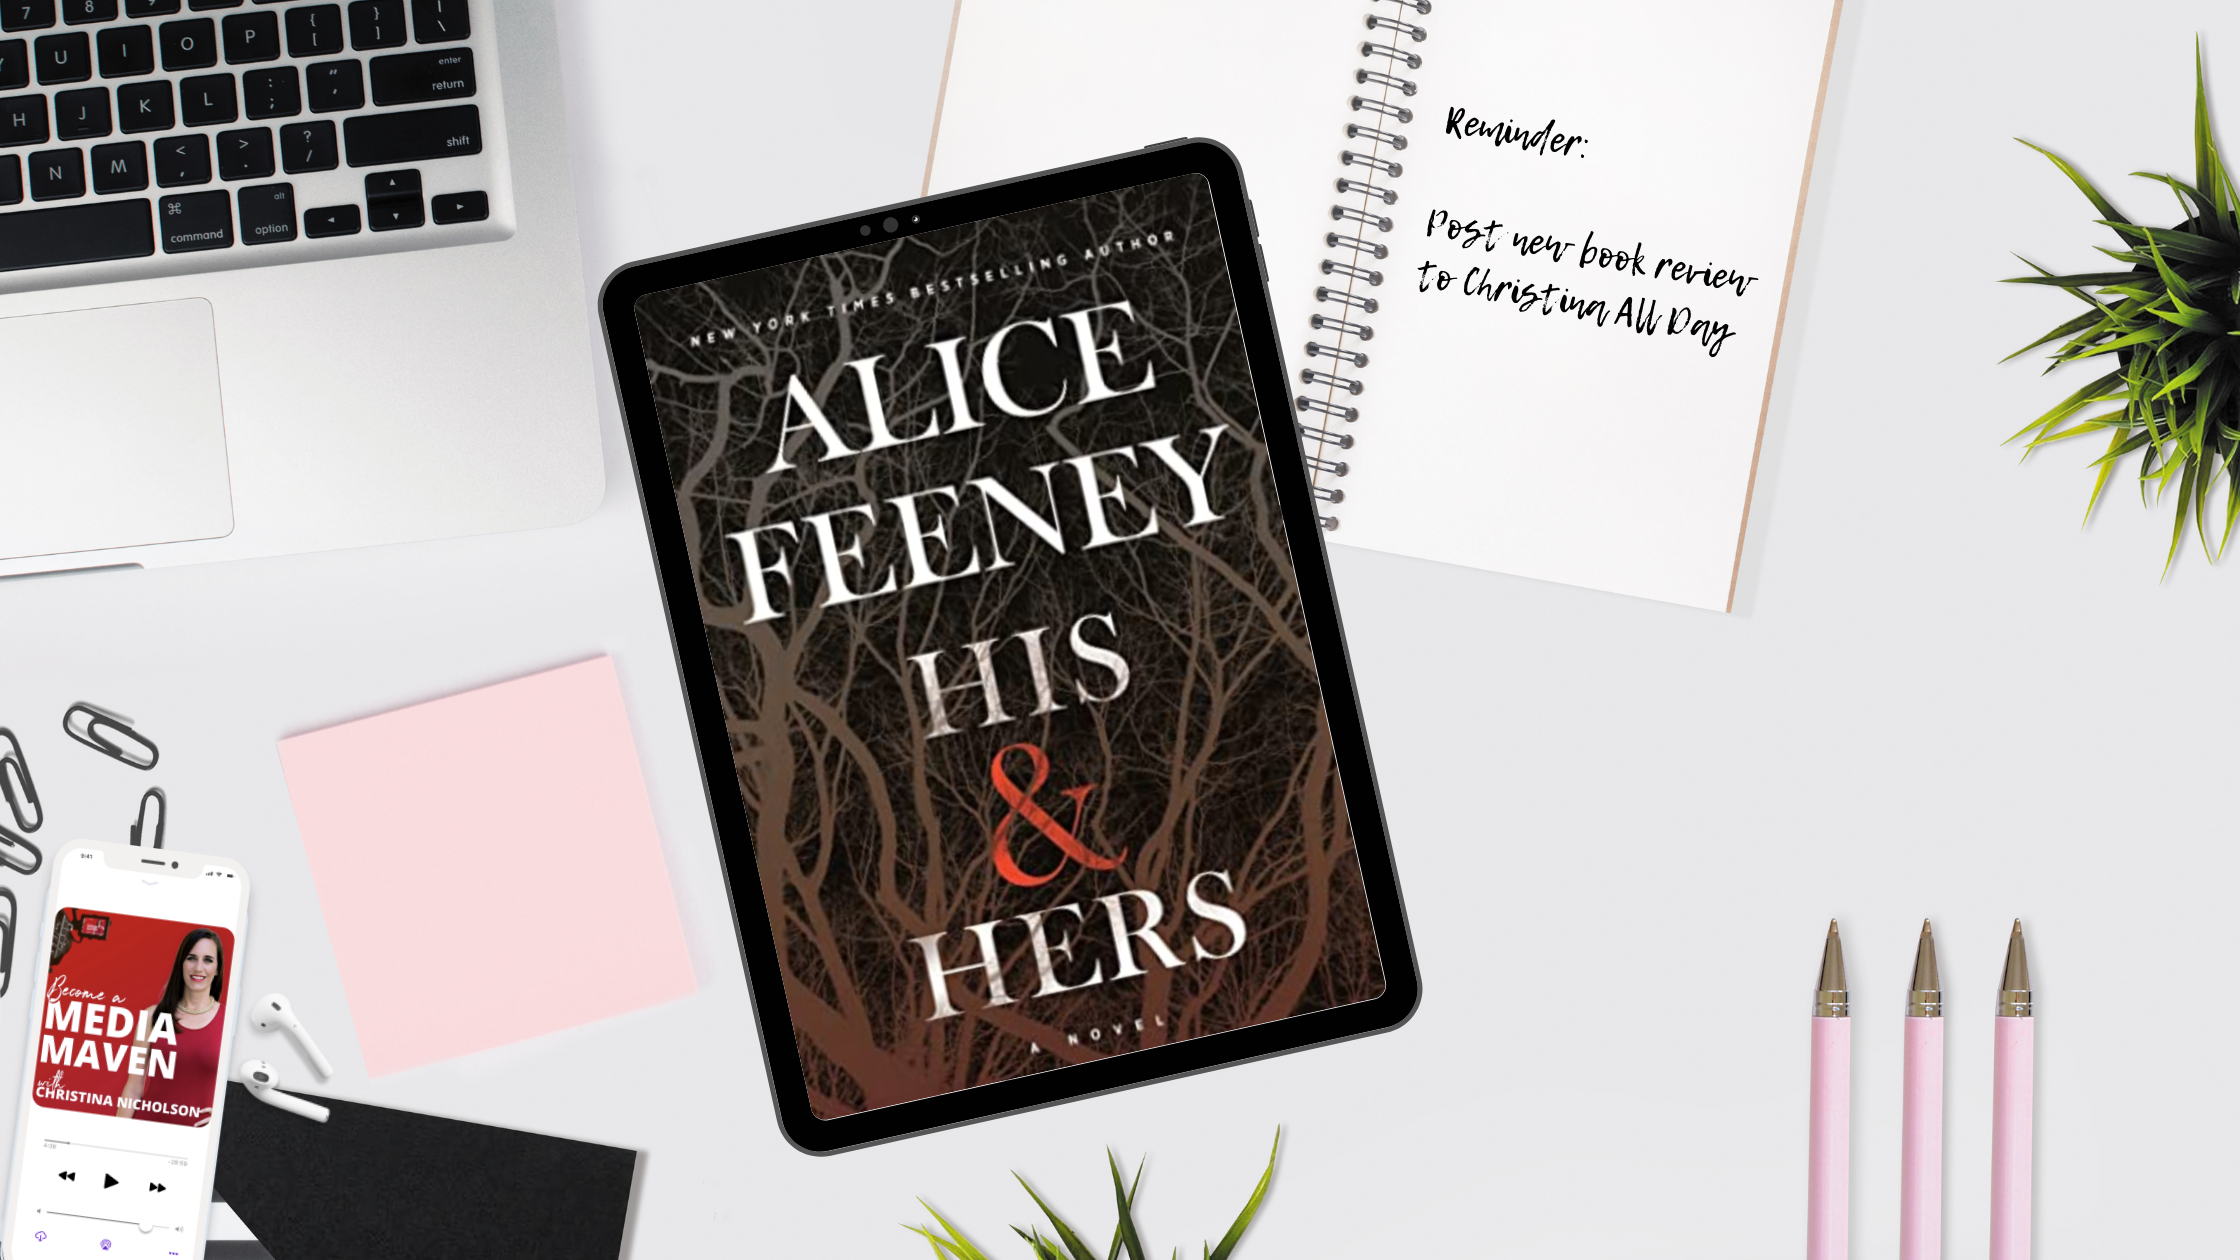 His & Hers by Alice Feeney Book Review